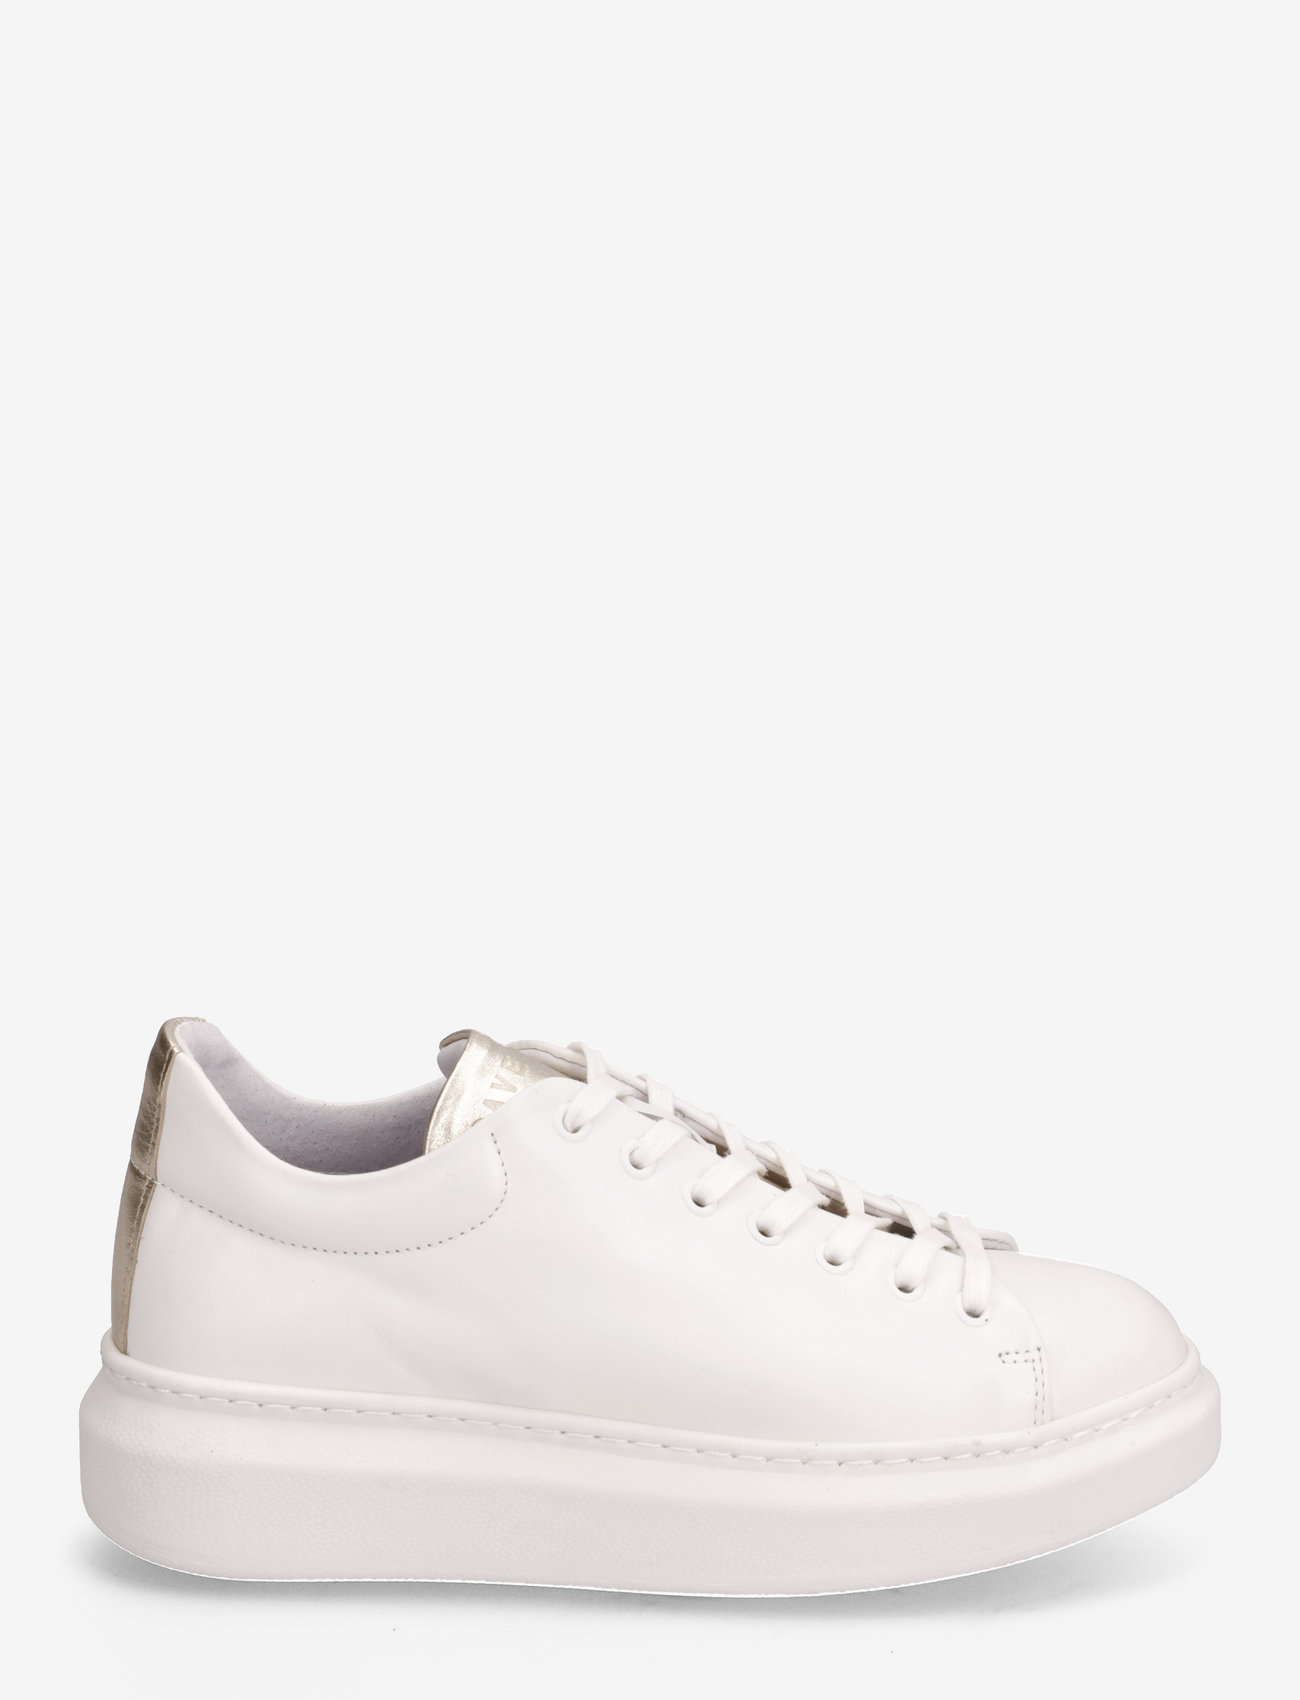 Pavement - Dee Metal - low top sneakers - white/gold - 1